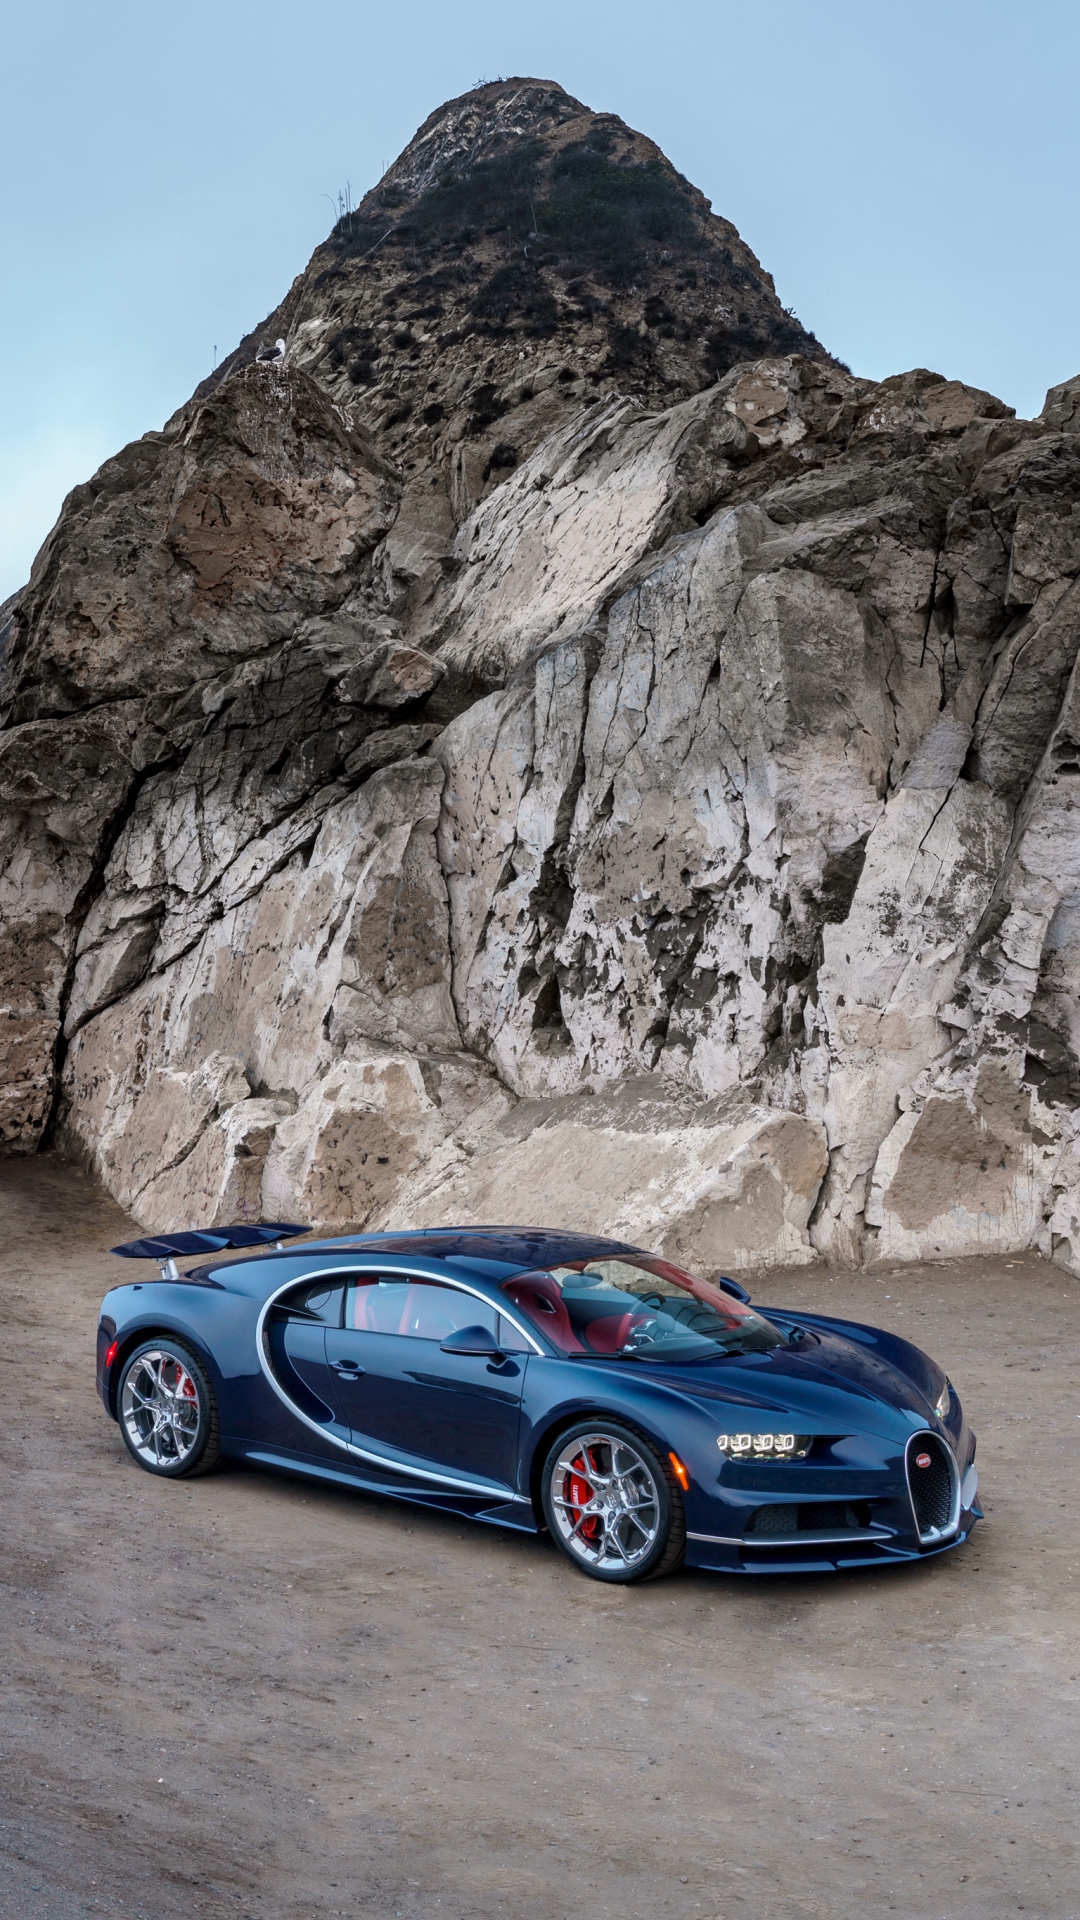 Heres your new wallpaper featuring the Bugatti Chiron Pur Sport getting  some air  AutoBuzzmy